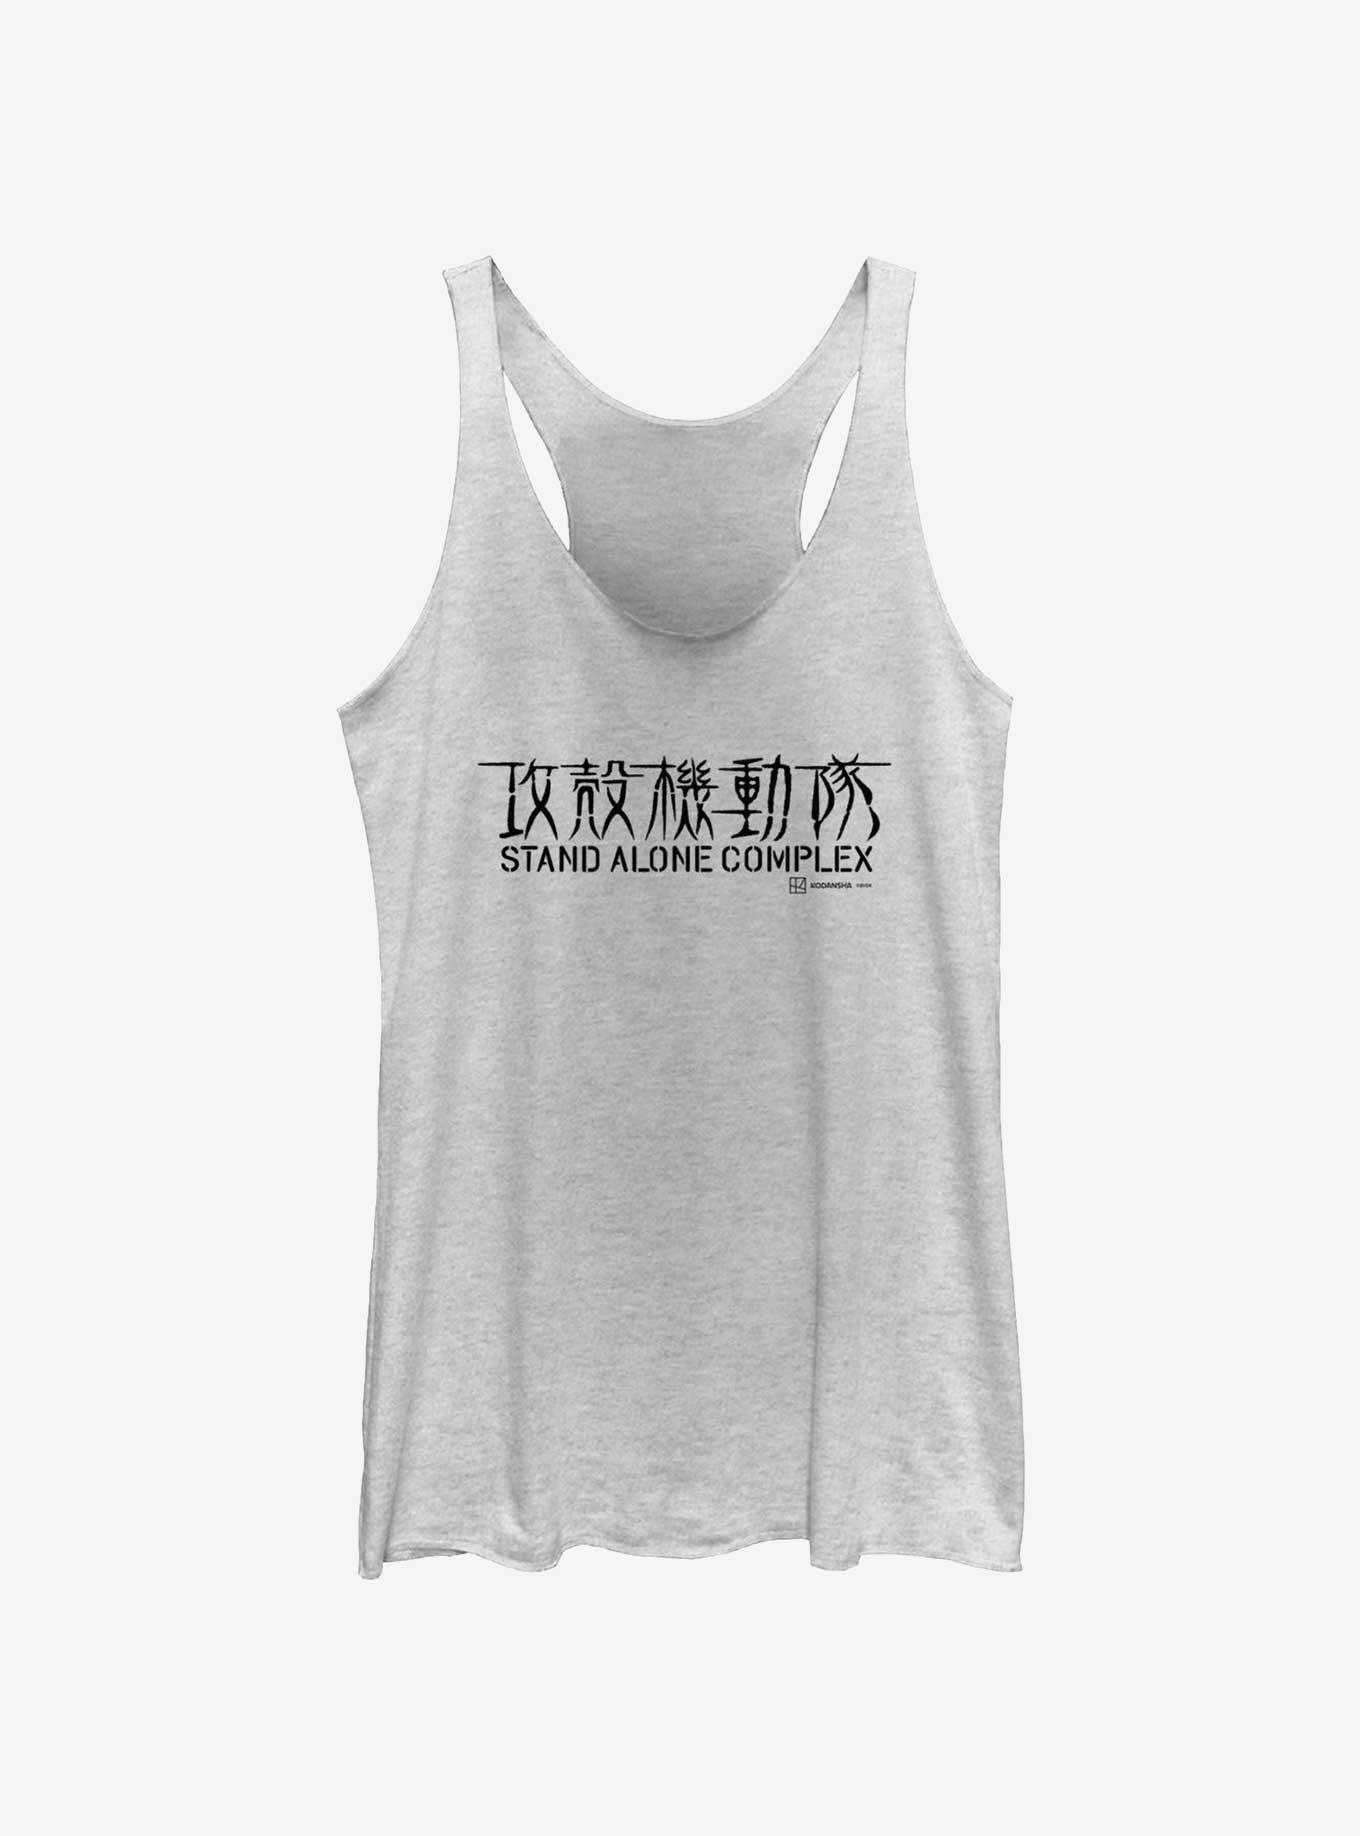 Ghost in the Shell Stand Alone Complex Logo Girls Tank, WHITE HTR, hi-res